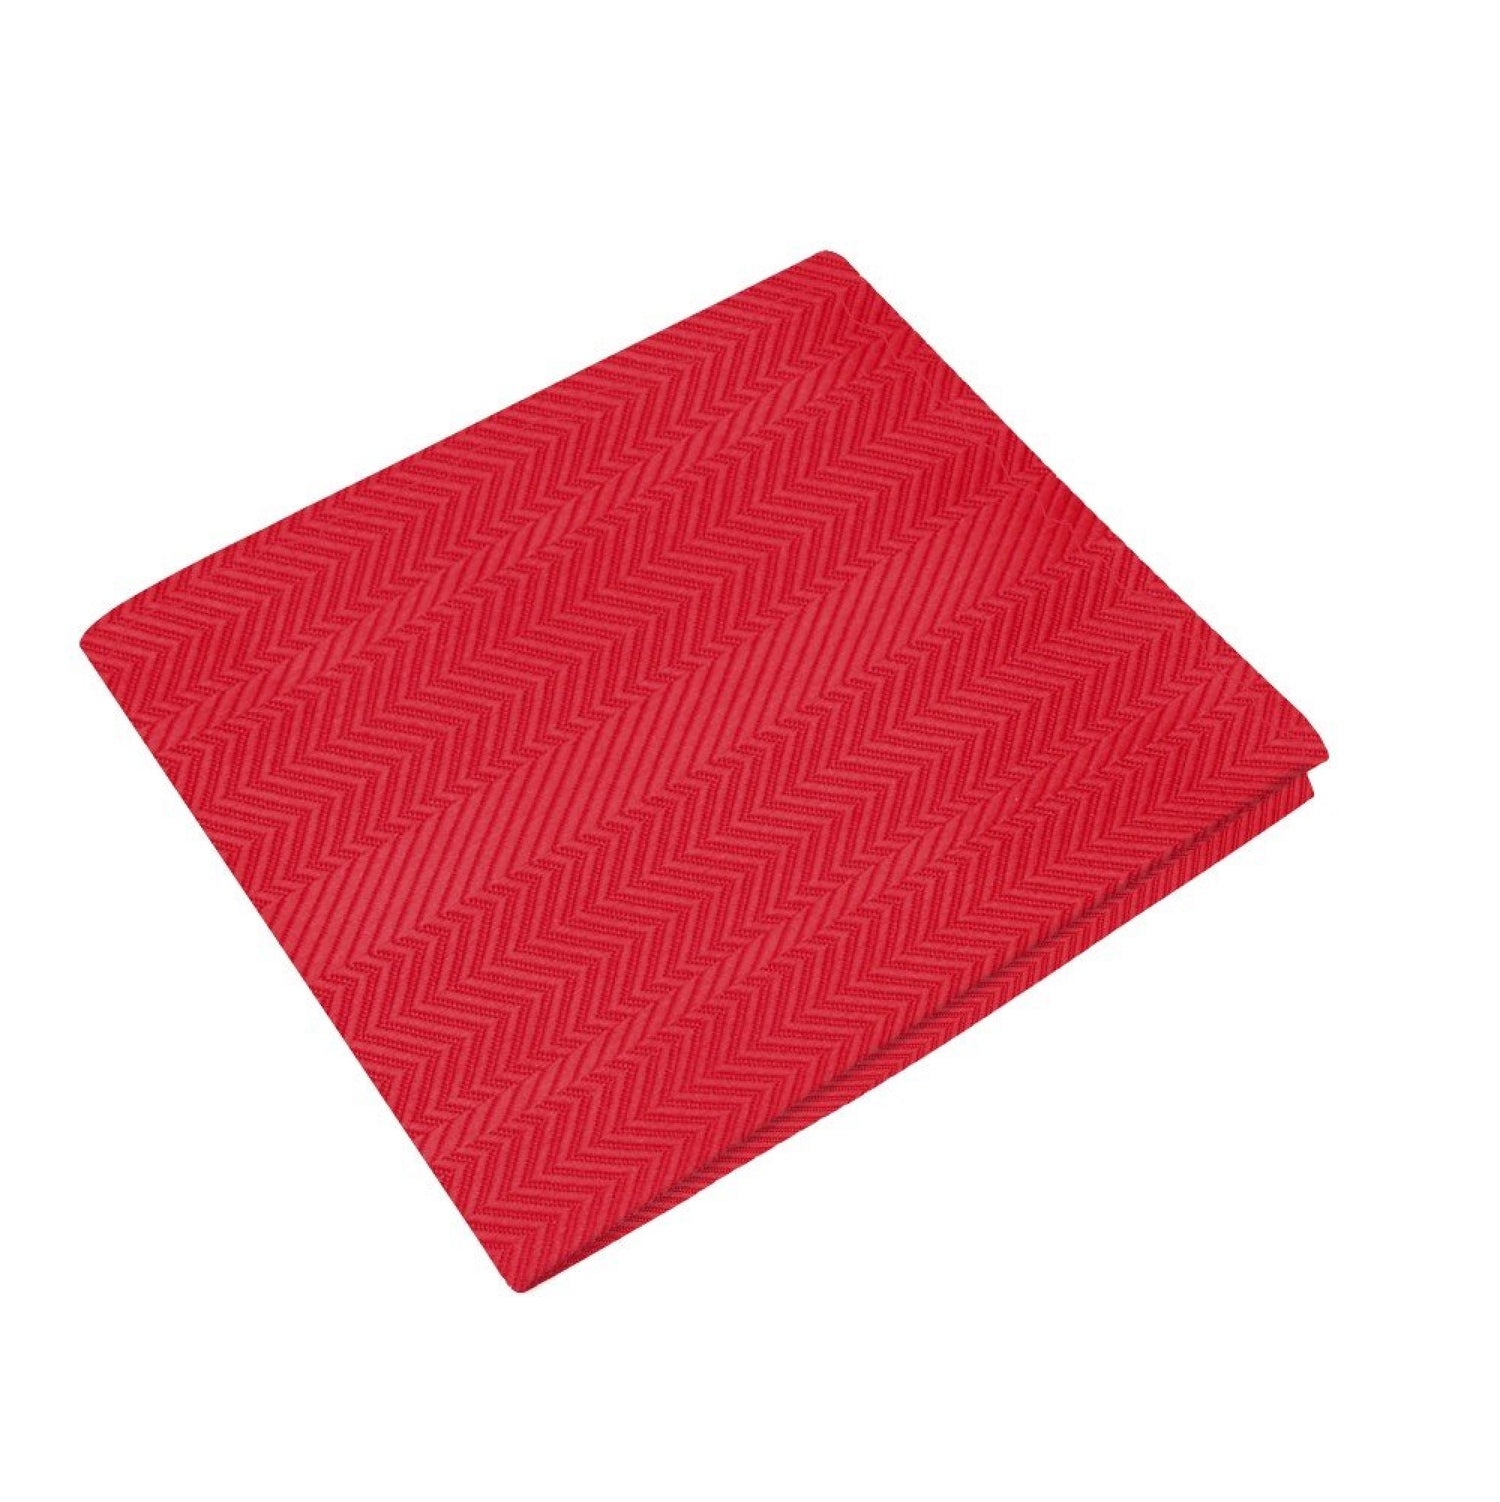 A Real Red Color With Sophisticated Lined Texture Pocket Square